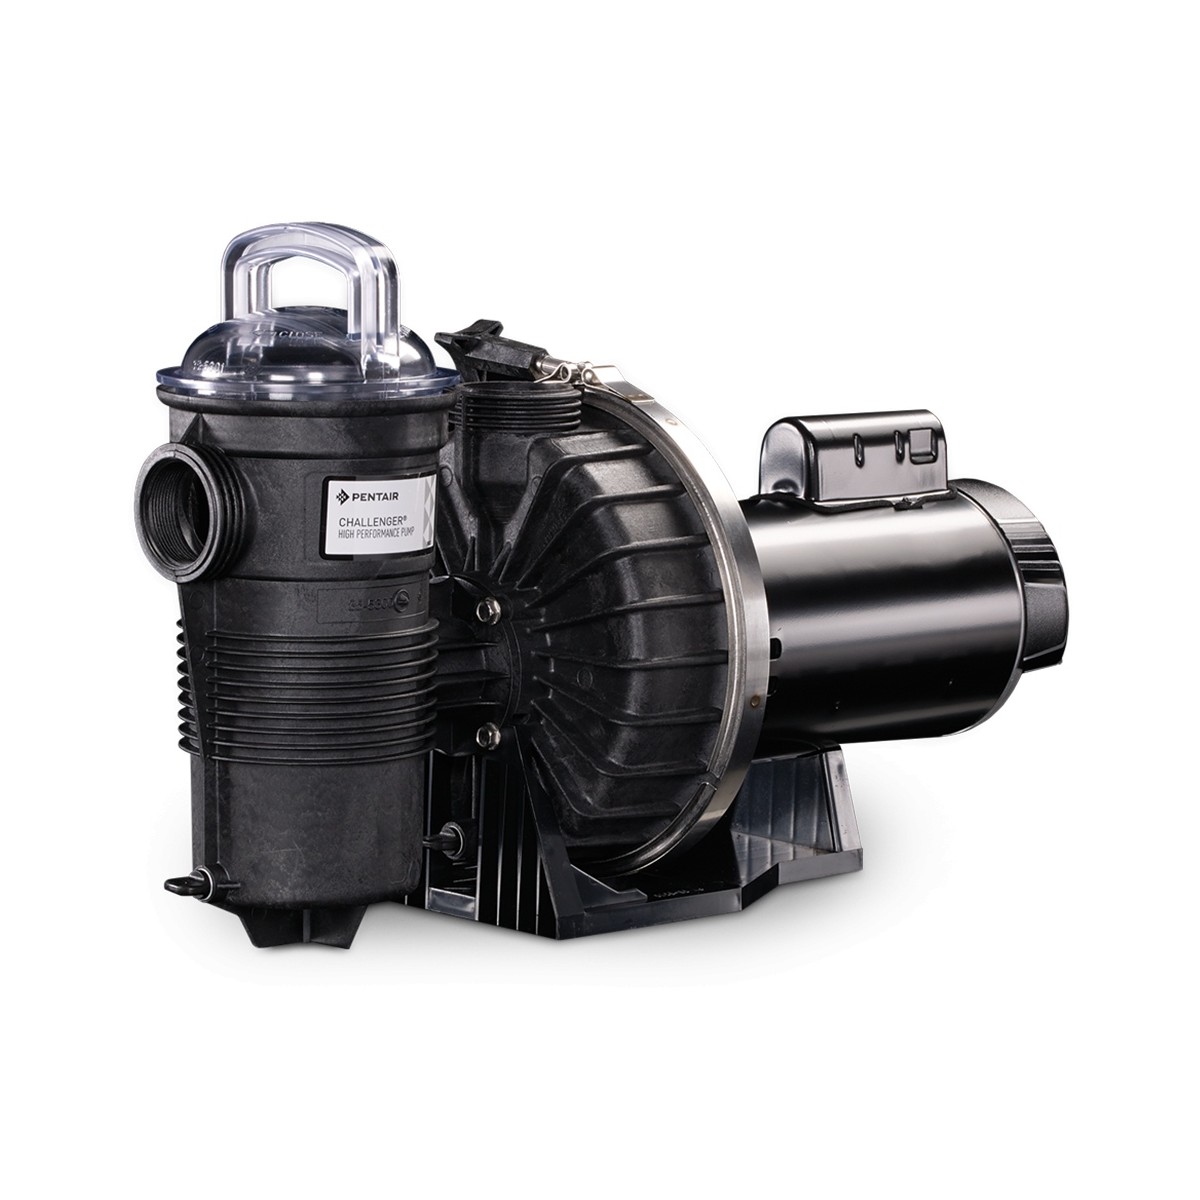 Pompa piscina Pentair CHALLENGER 1,50 KW/2 HP trifase